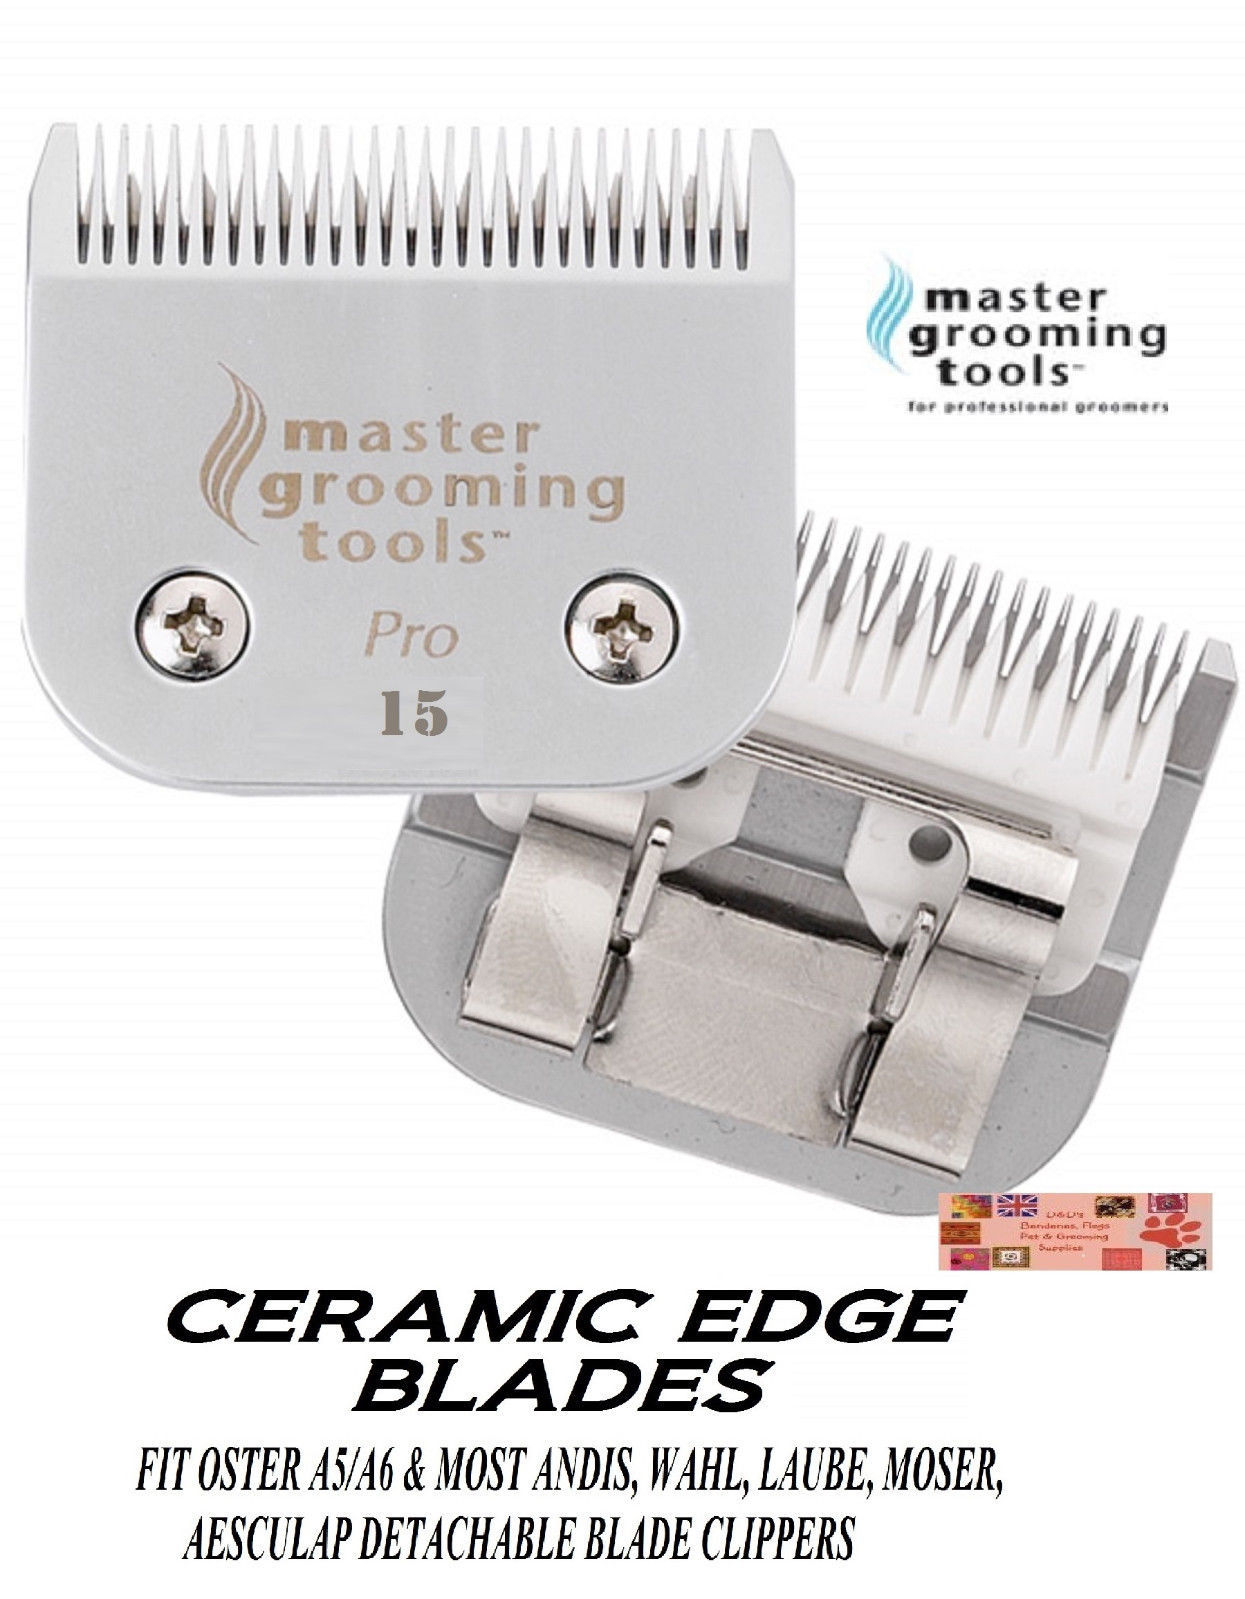 PRO CERAMIC Edge Pet Grooming 15 Blade*Fit Oster A5/A6,MOST Andis,Wahl Clipper